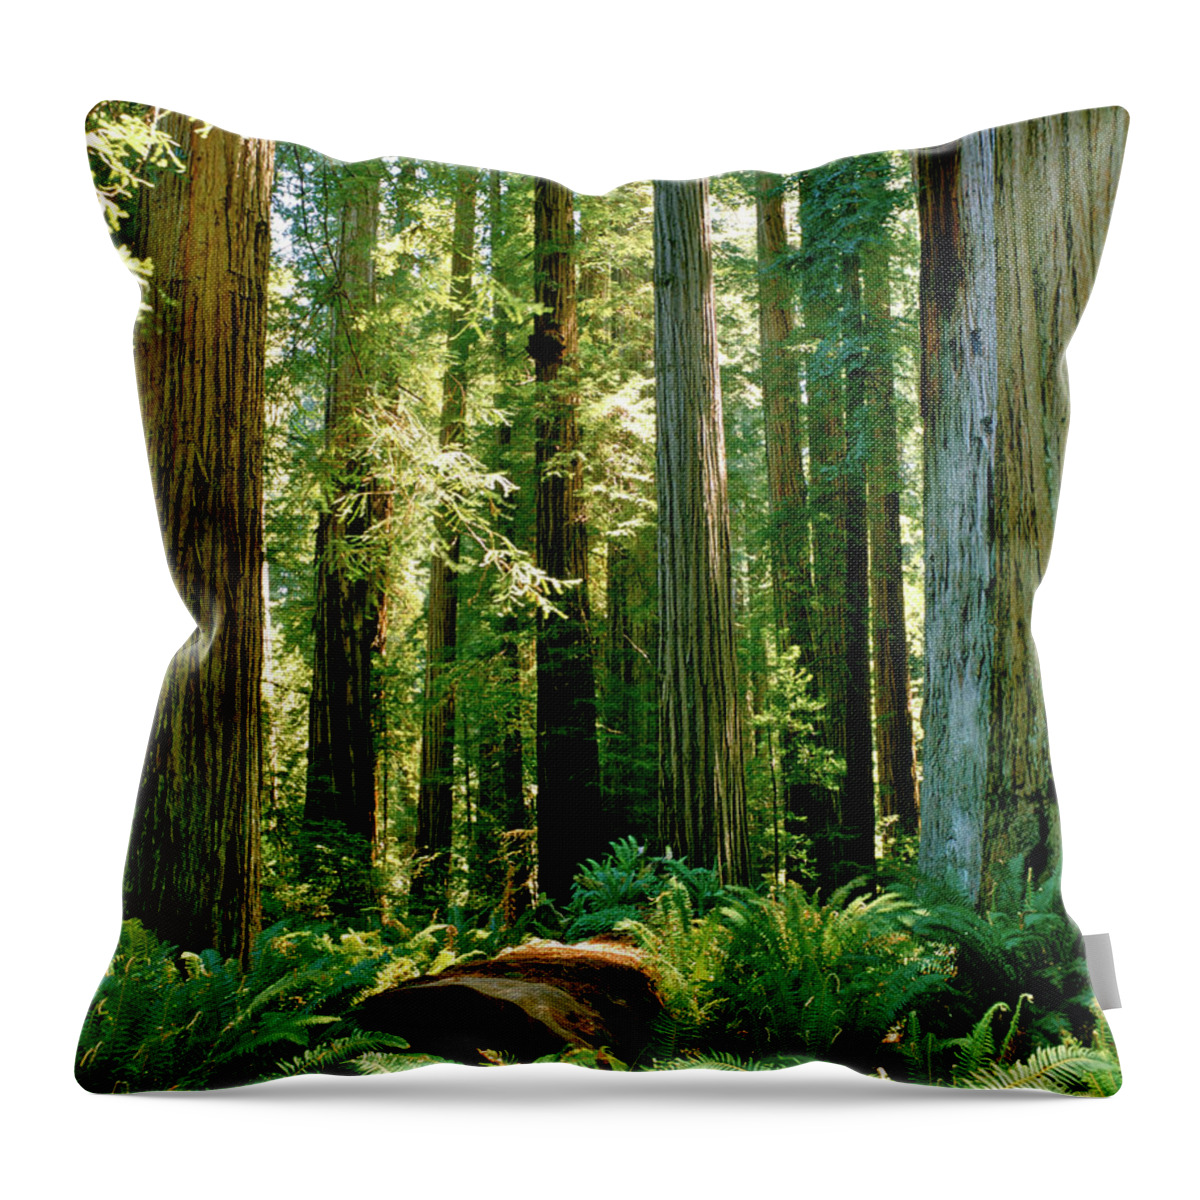 Stout Grove Throw Pillow featuring the photograph Stout Grove Coastal Redwoods by Ed Riche